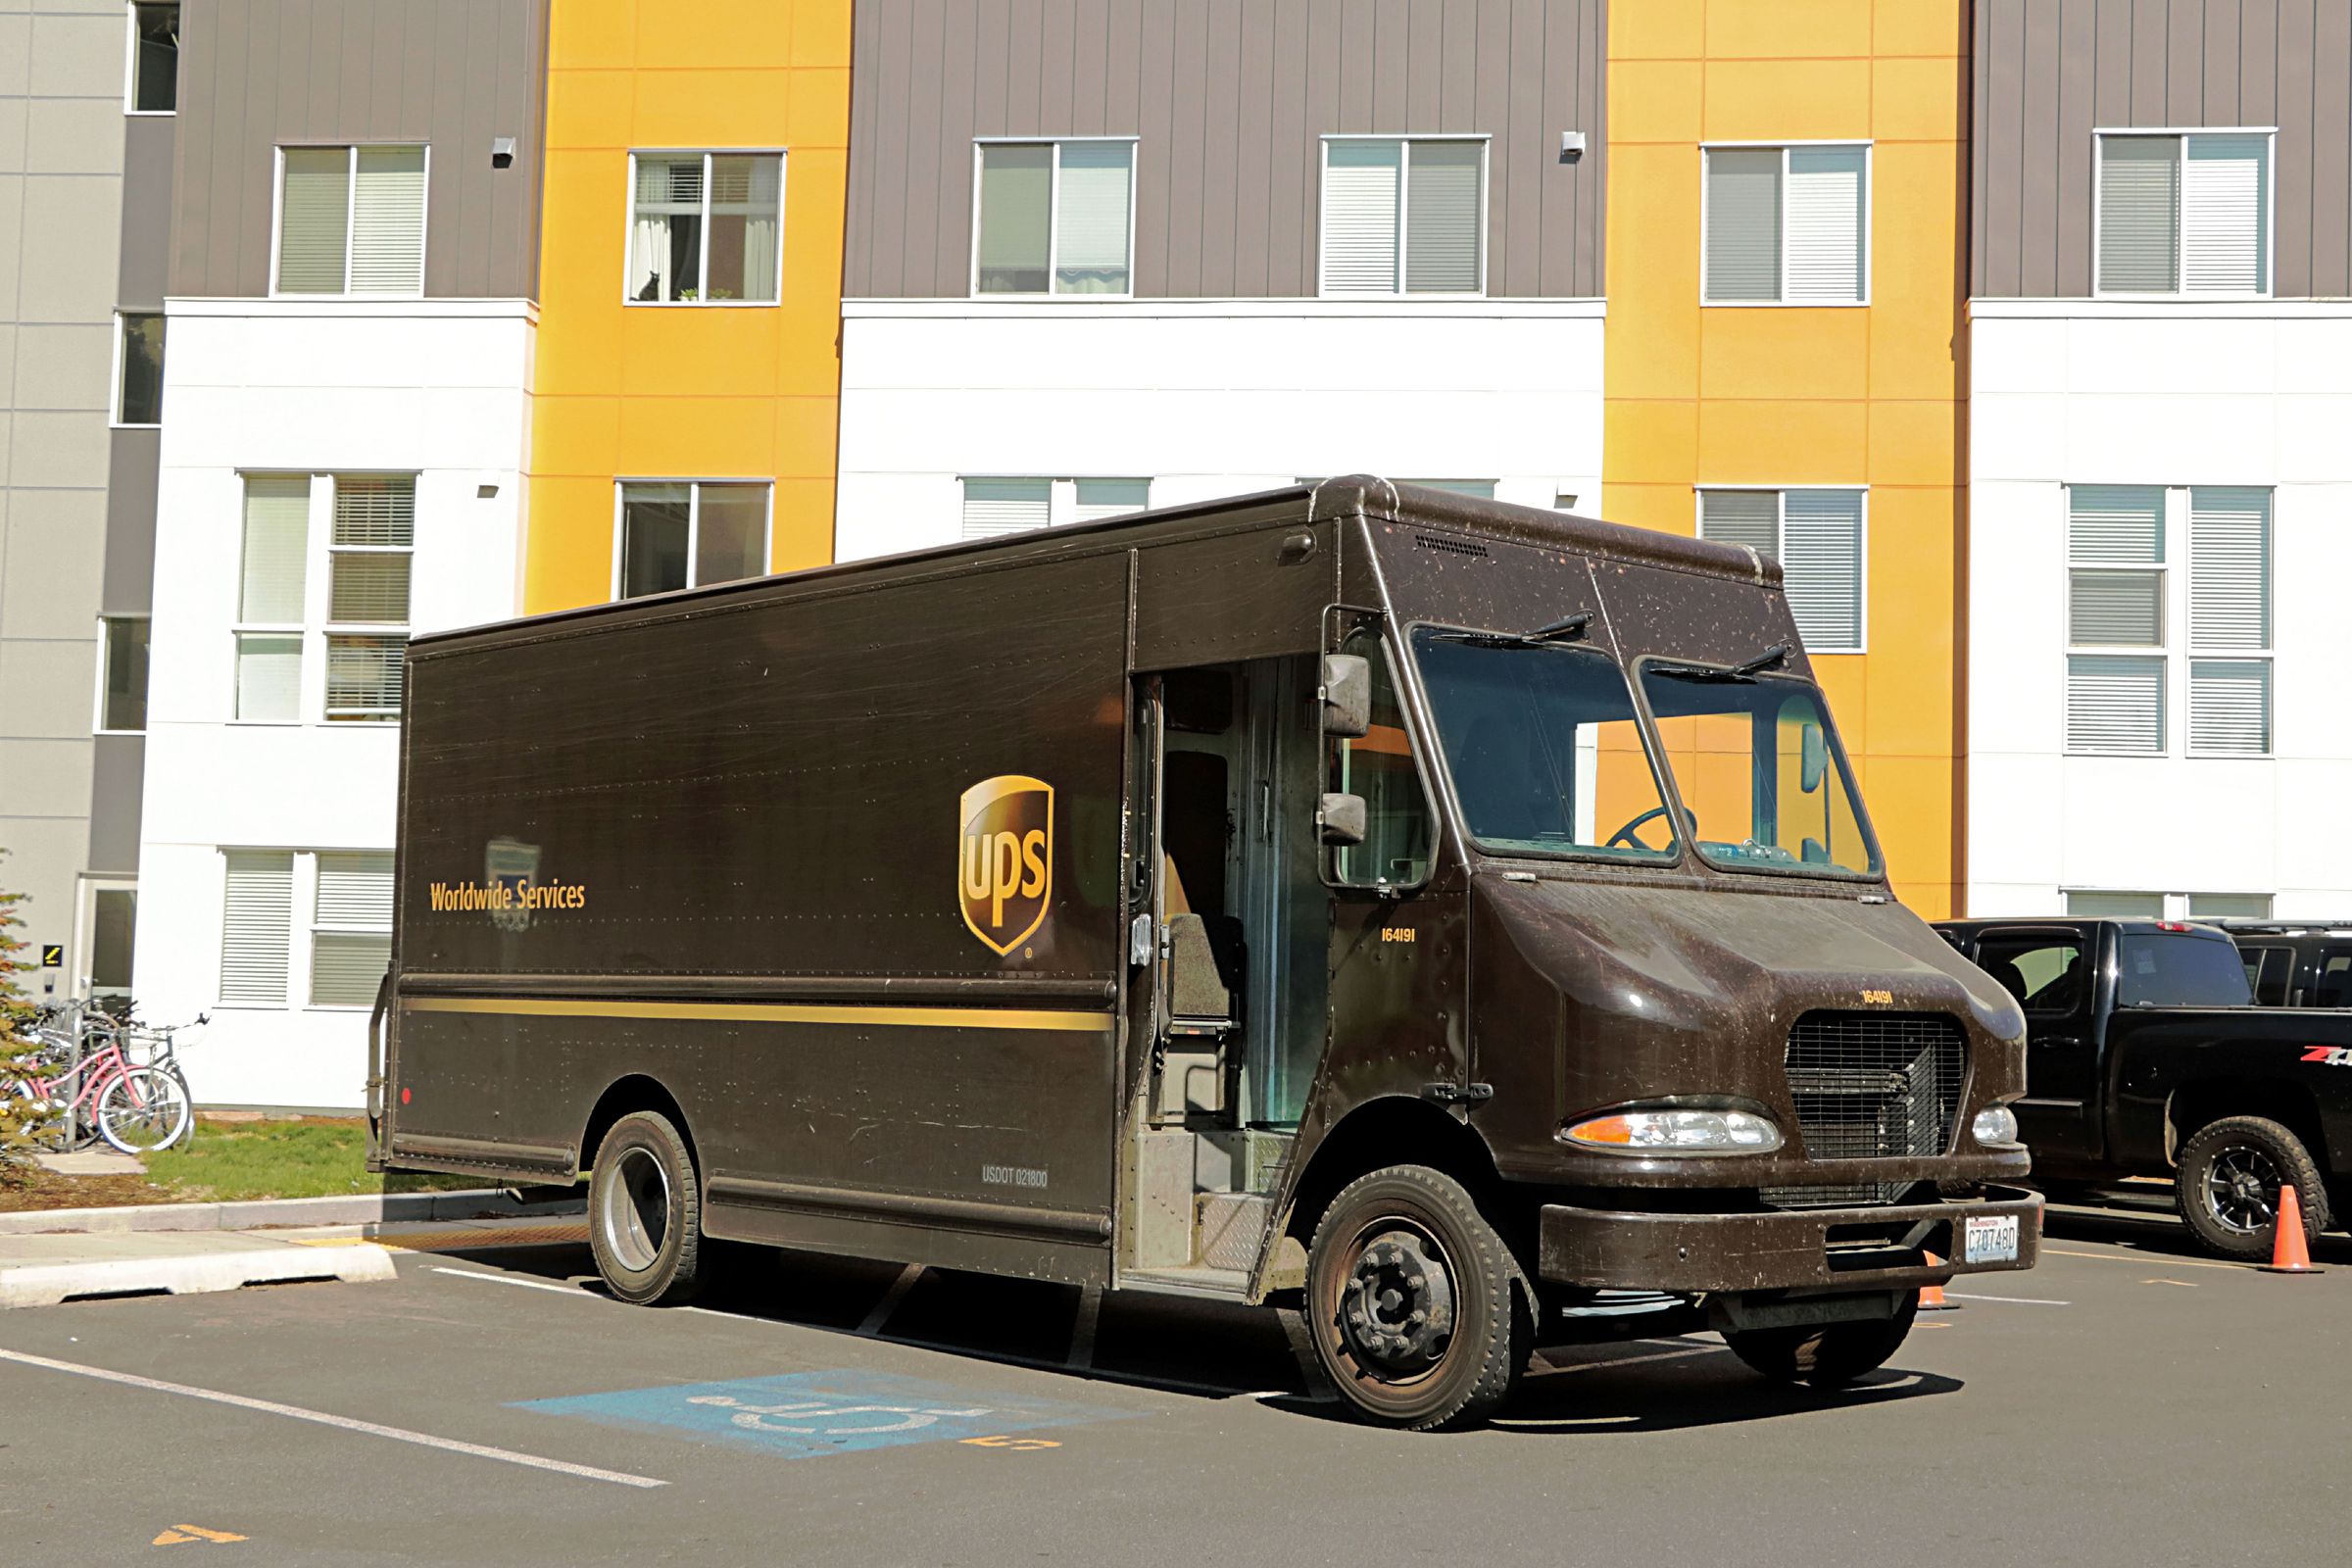 United Parcel Service truck